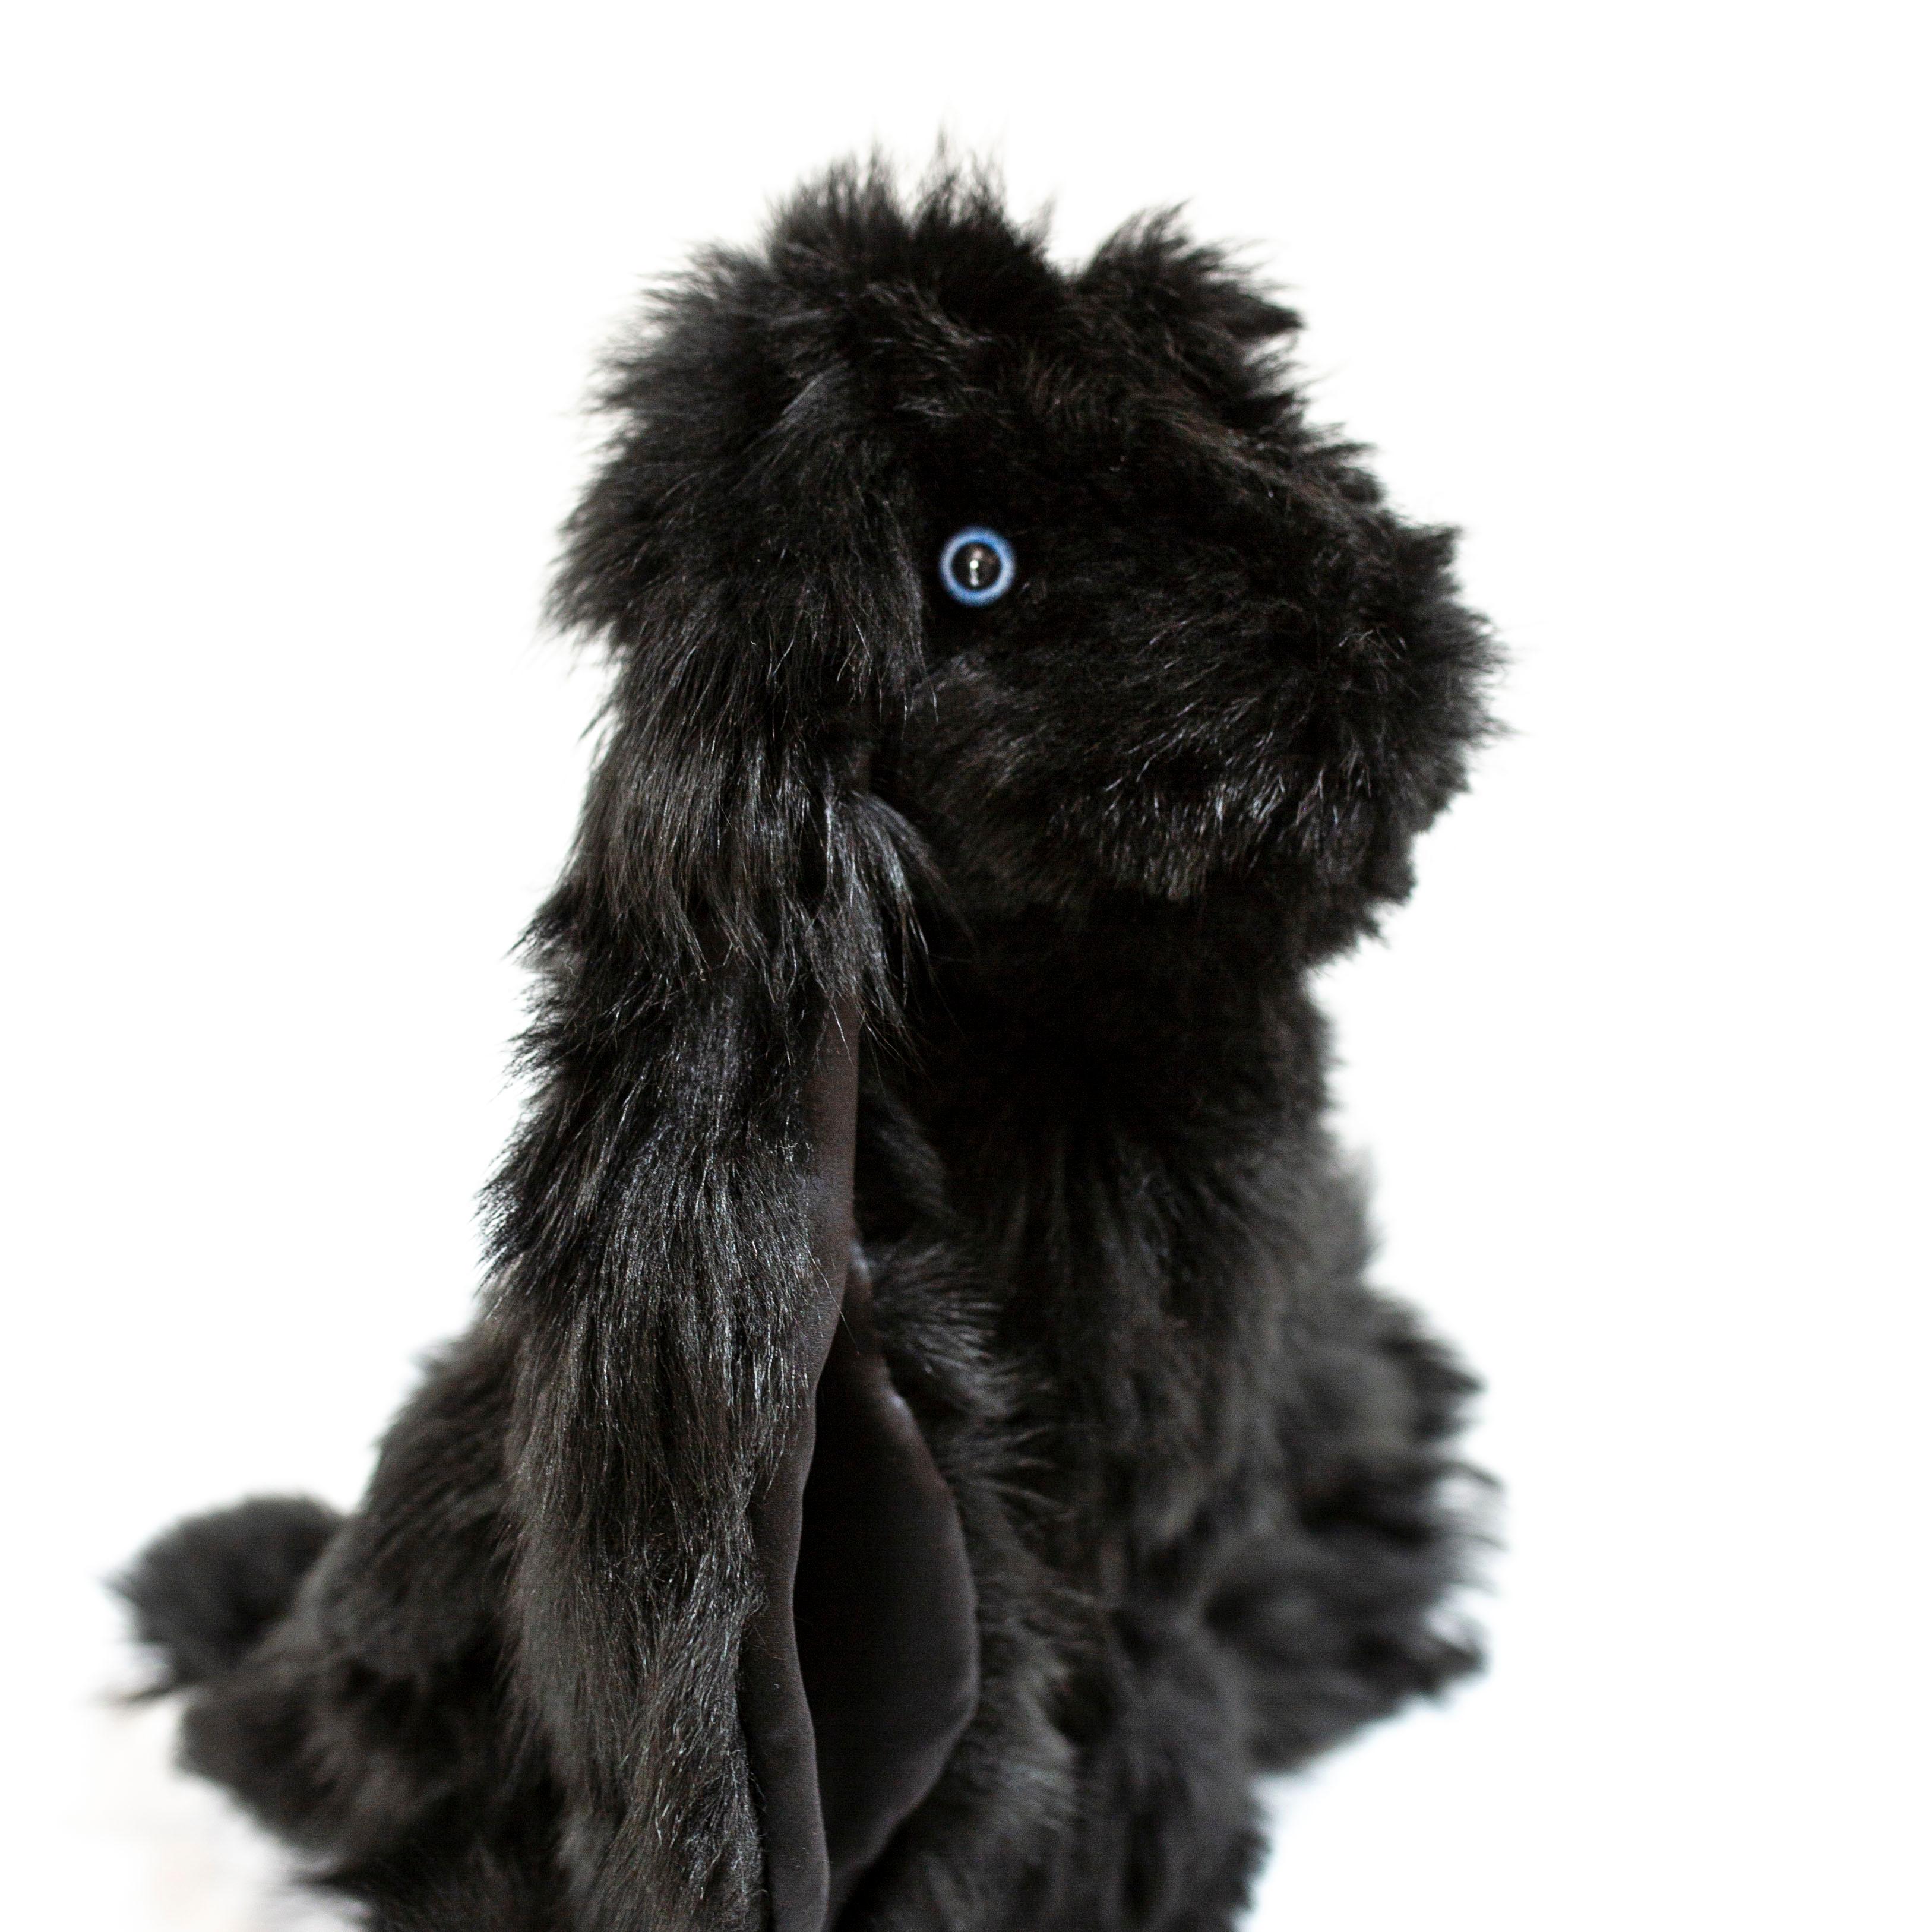 Design commissioned by JG SWITZER from a Ukranian plush toy artist, and sewn in our workshop from fluffy fur scraps, LITTLE JG RABBIT is for Bigs AND Littles. Created from our re-purposed, real Toscana sheep fur, this is our signature sheep fur that